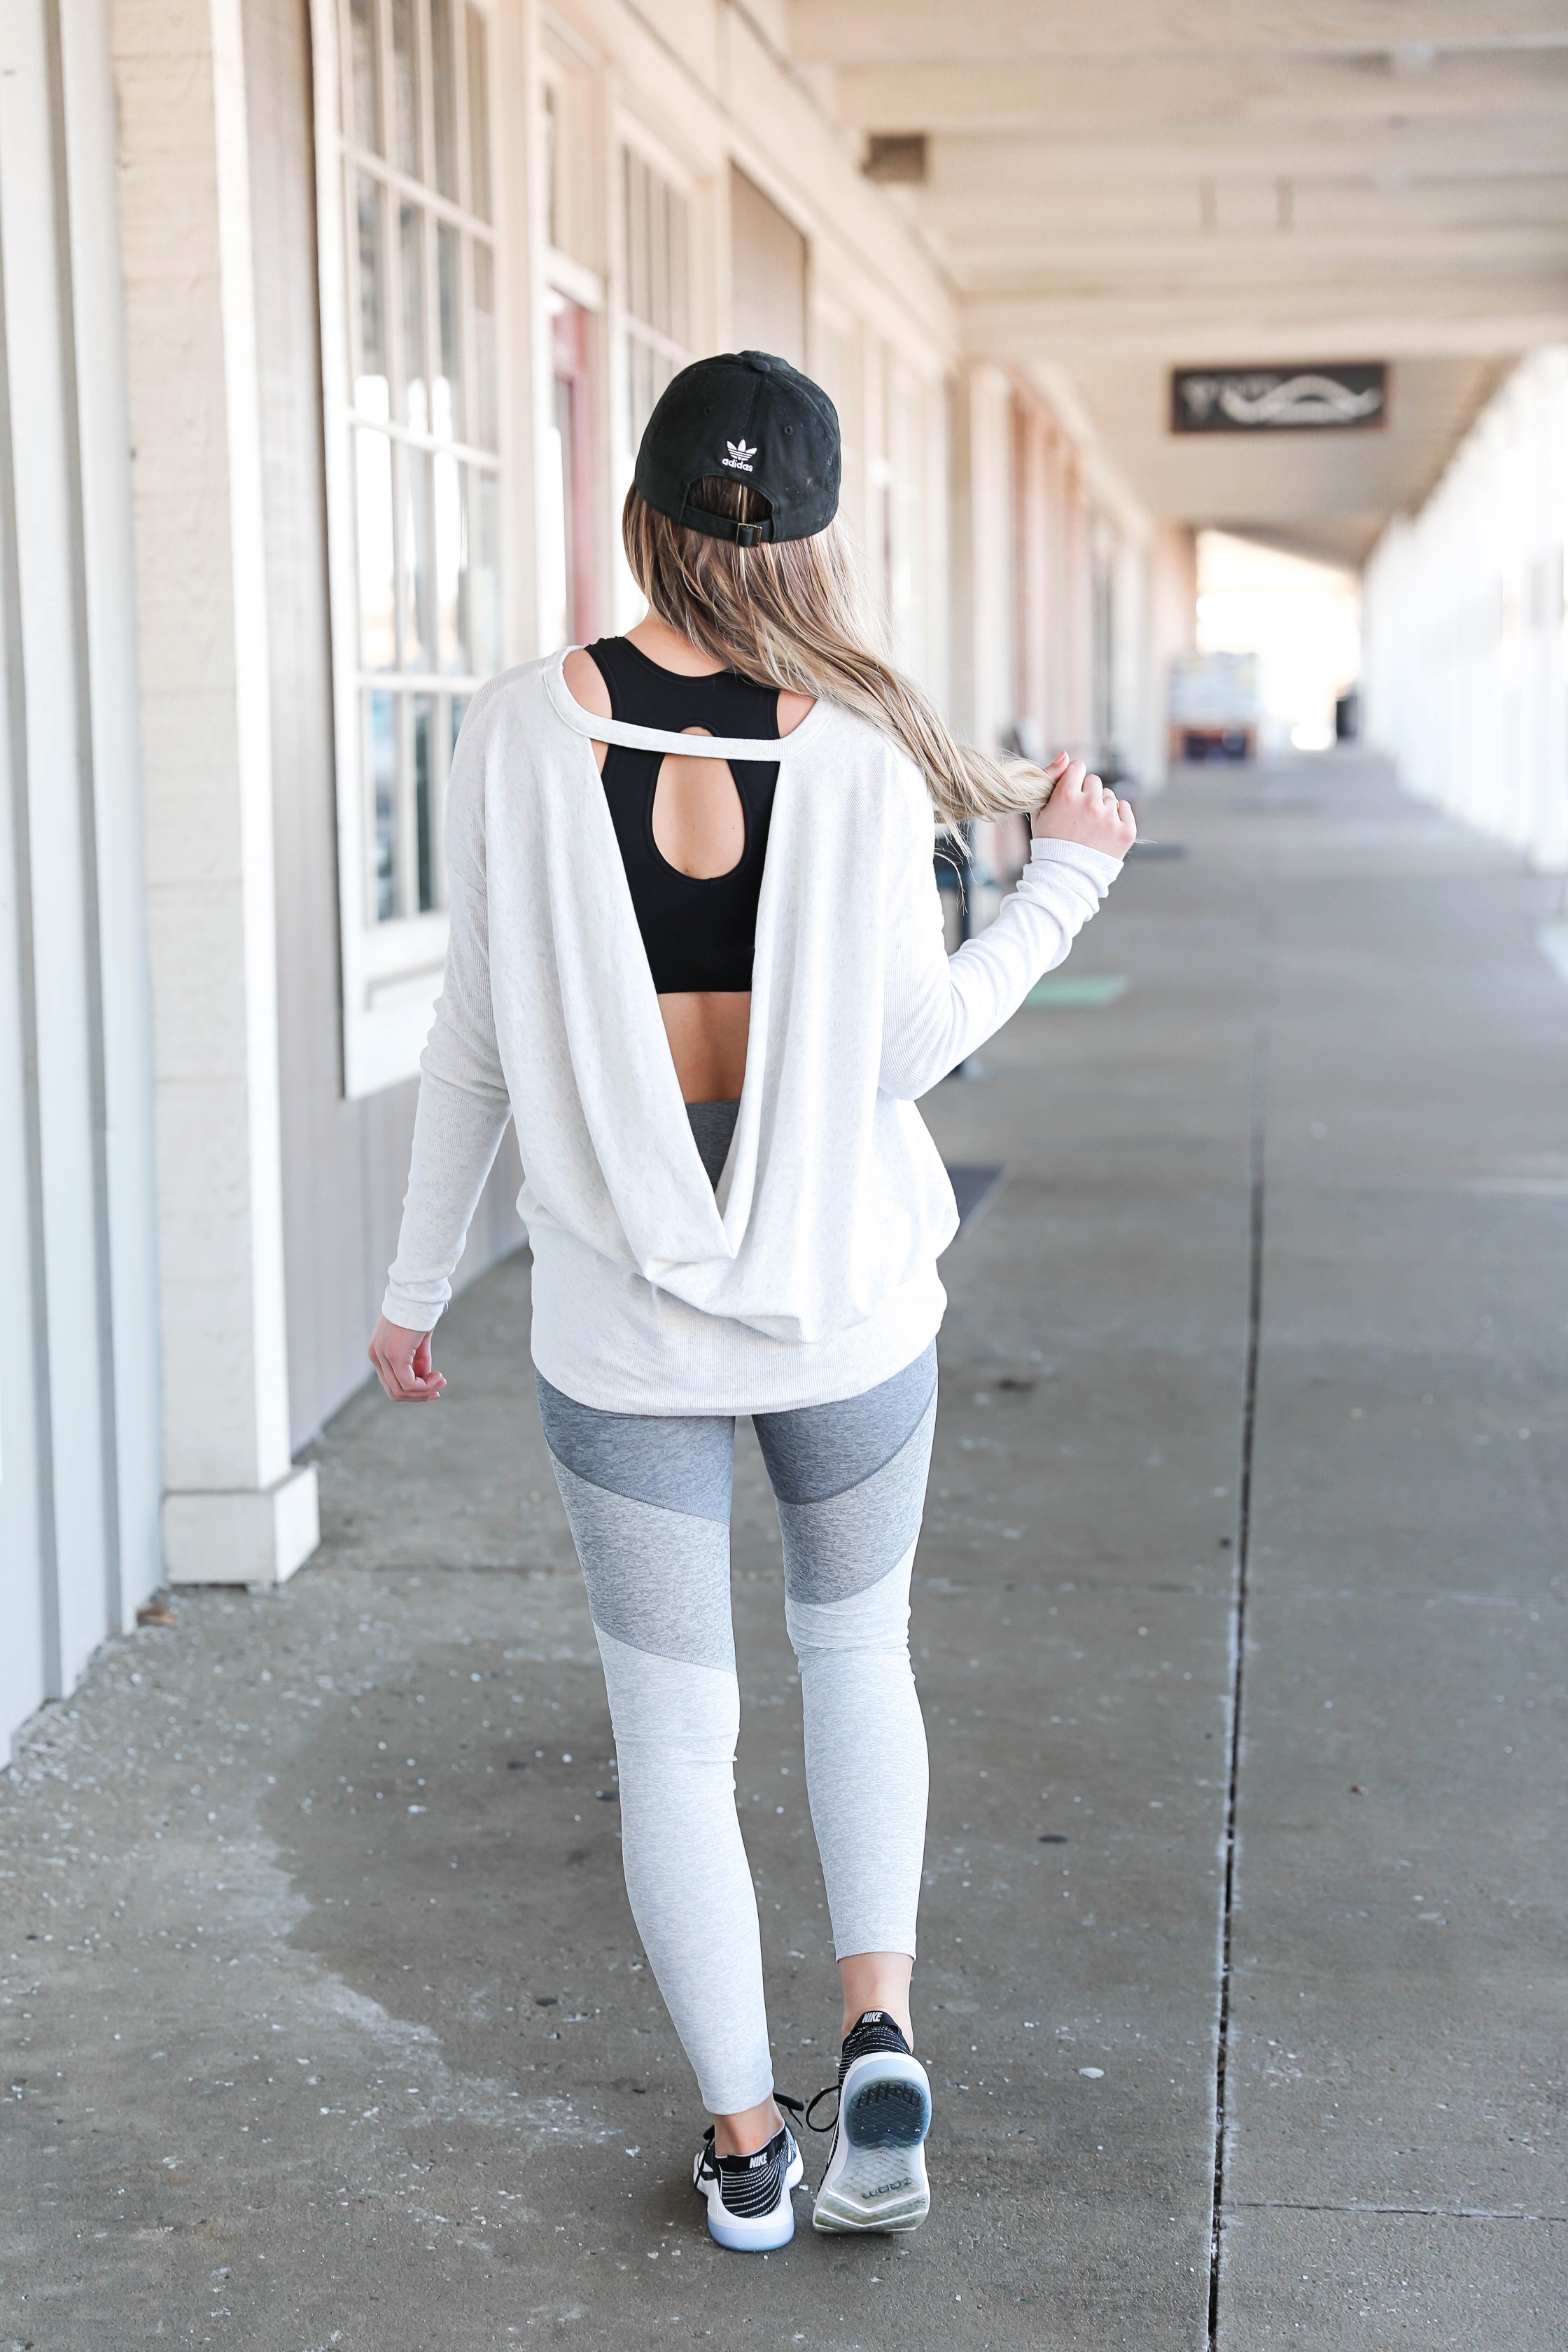 Cute workout outfit  Cute workout outfits, Workout clothes, Workout outfit